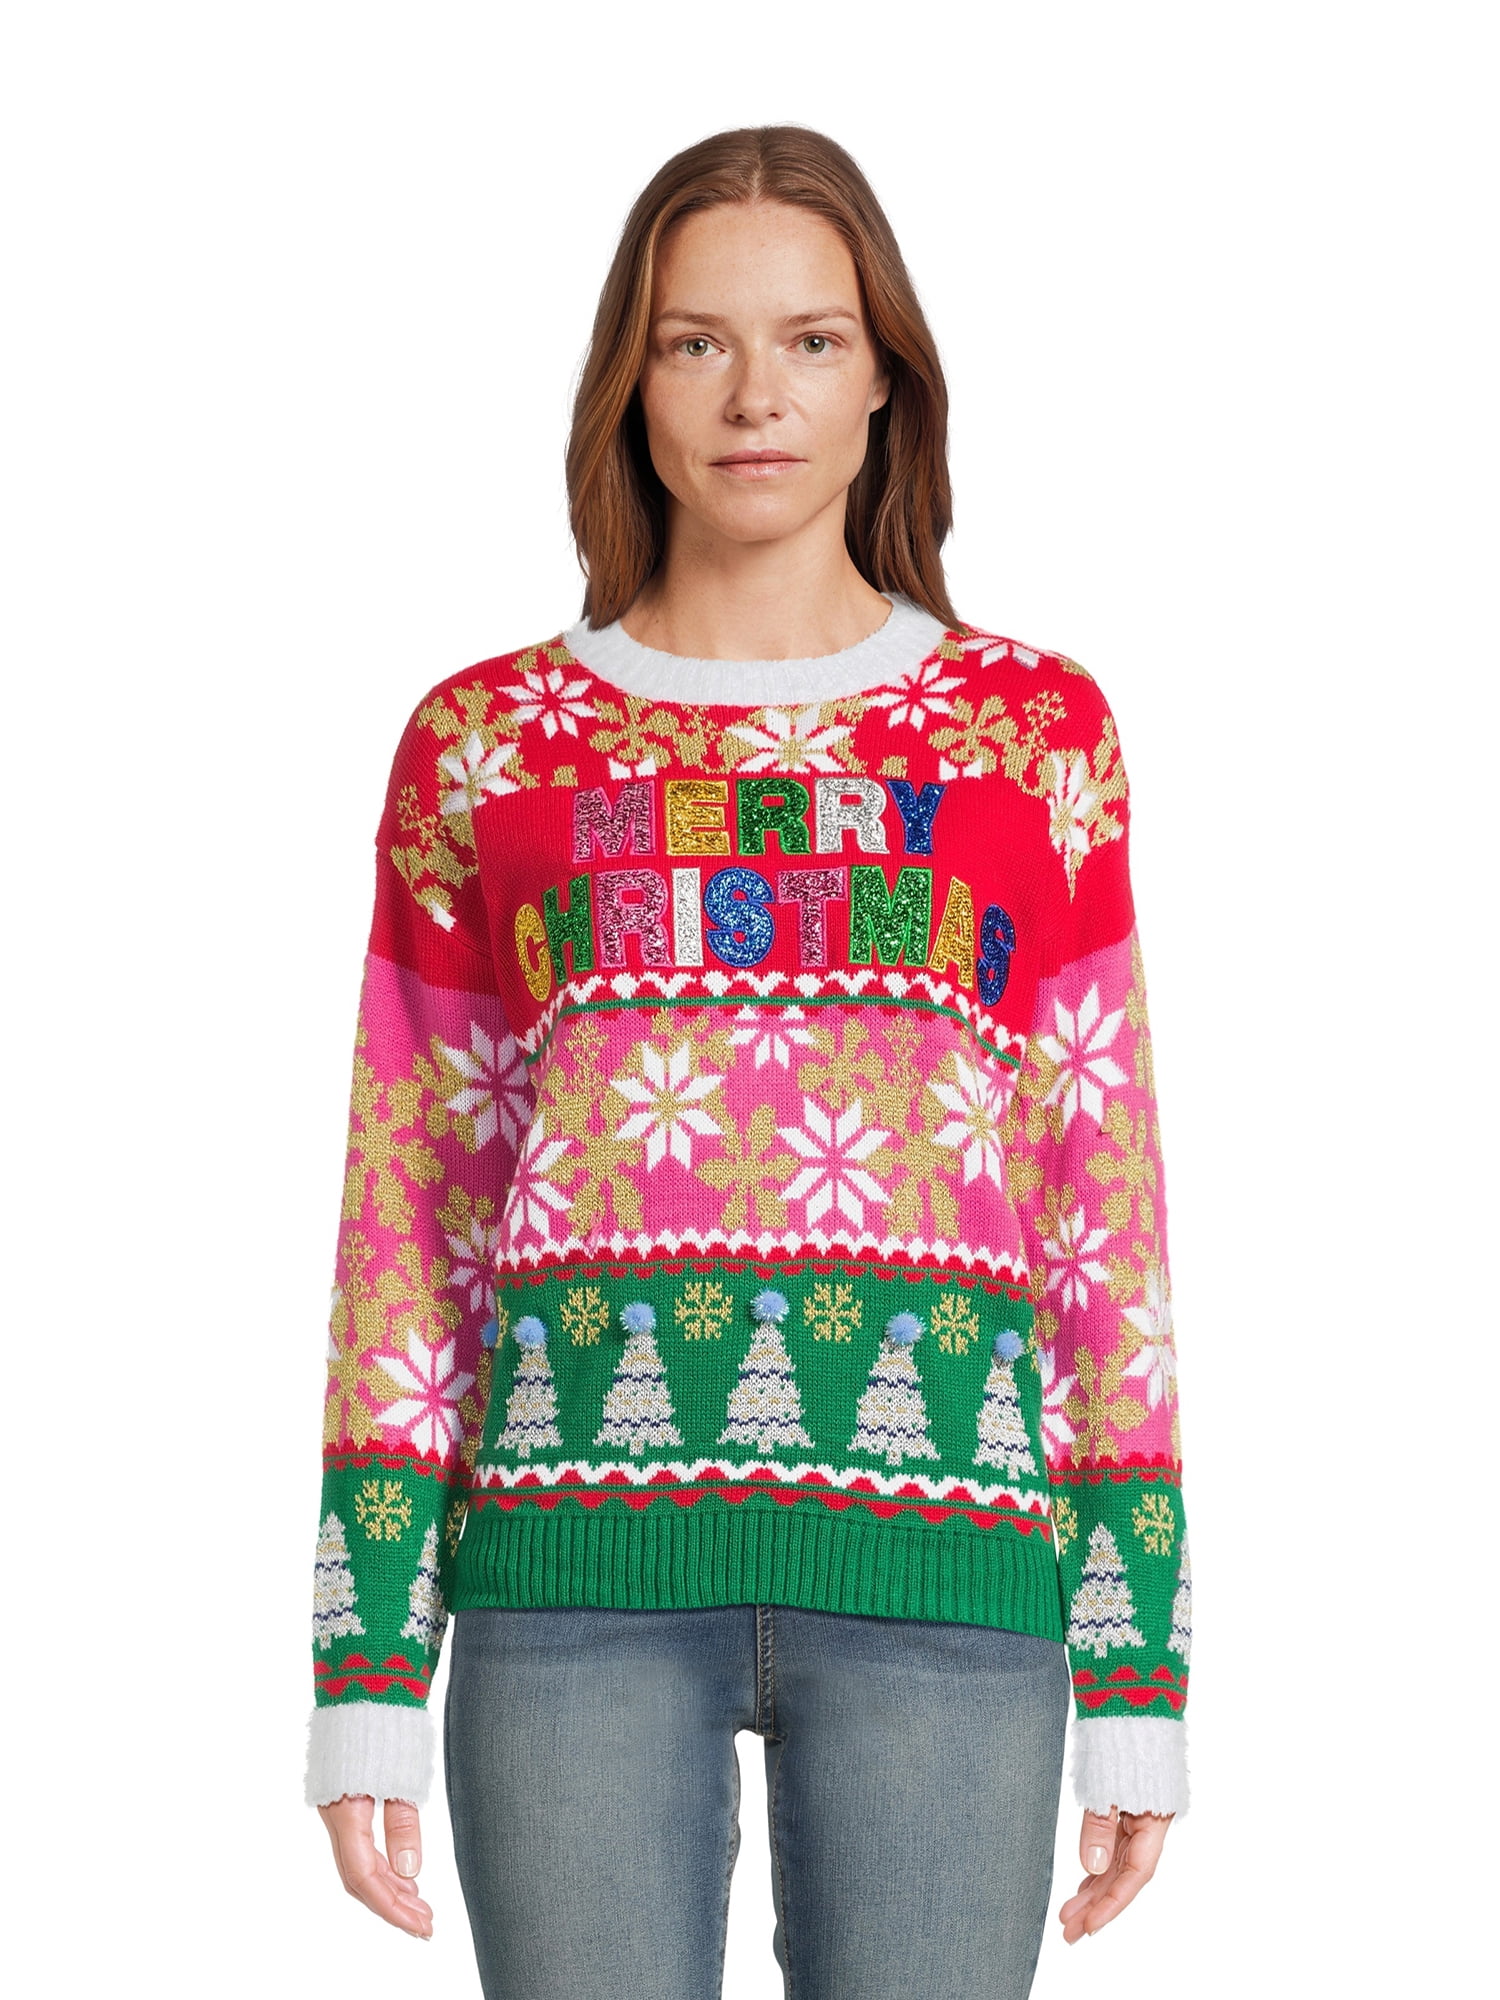 Holiday Time Women's Ugly Christmas Sweater, Sizes S-3X - Walmart.com